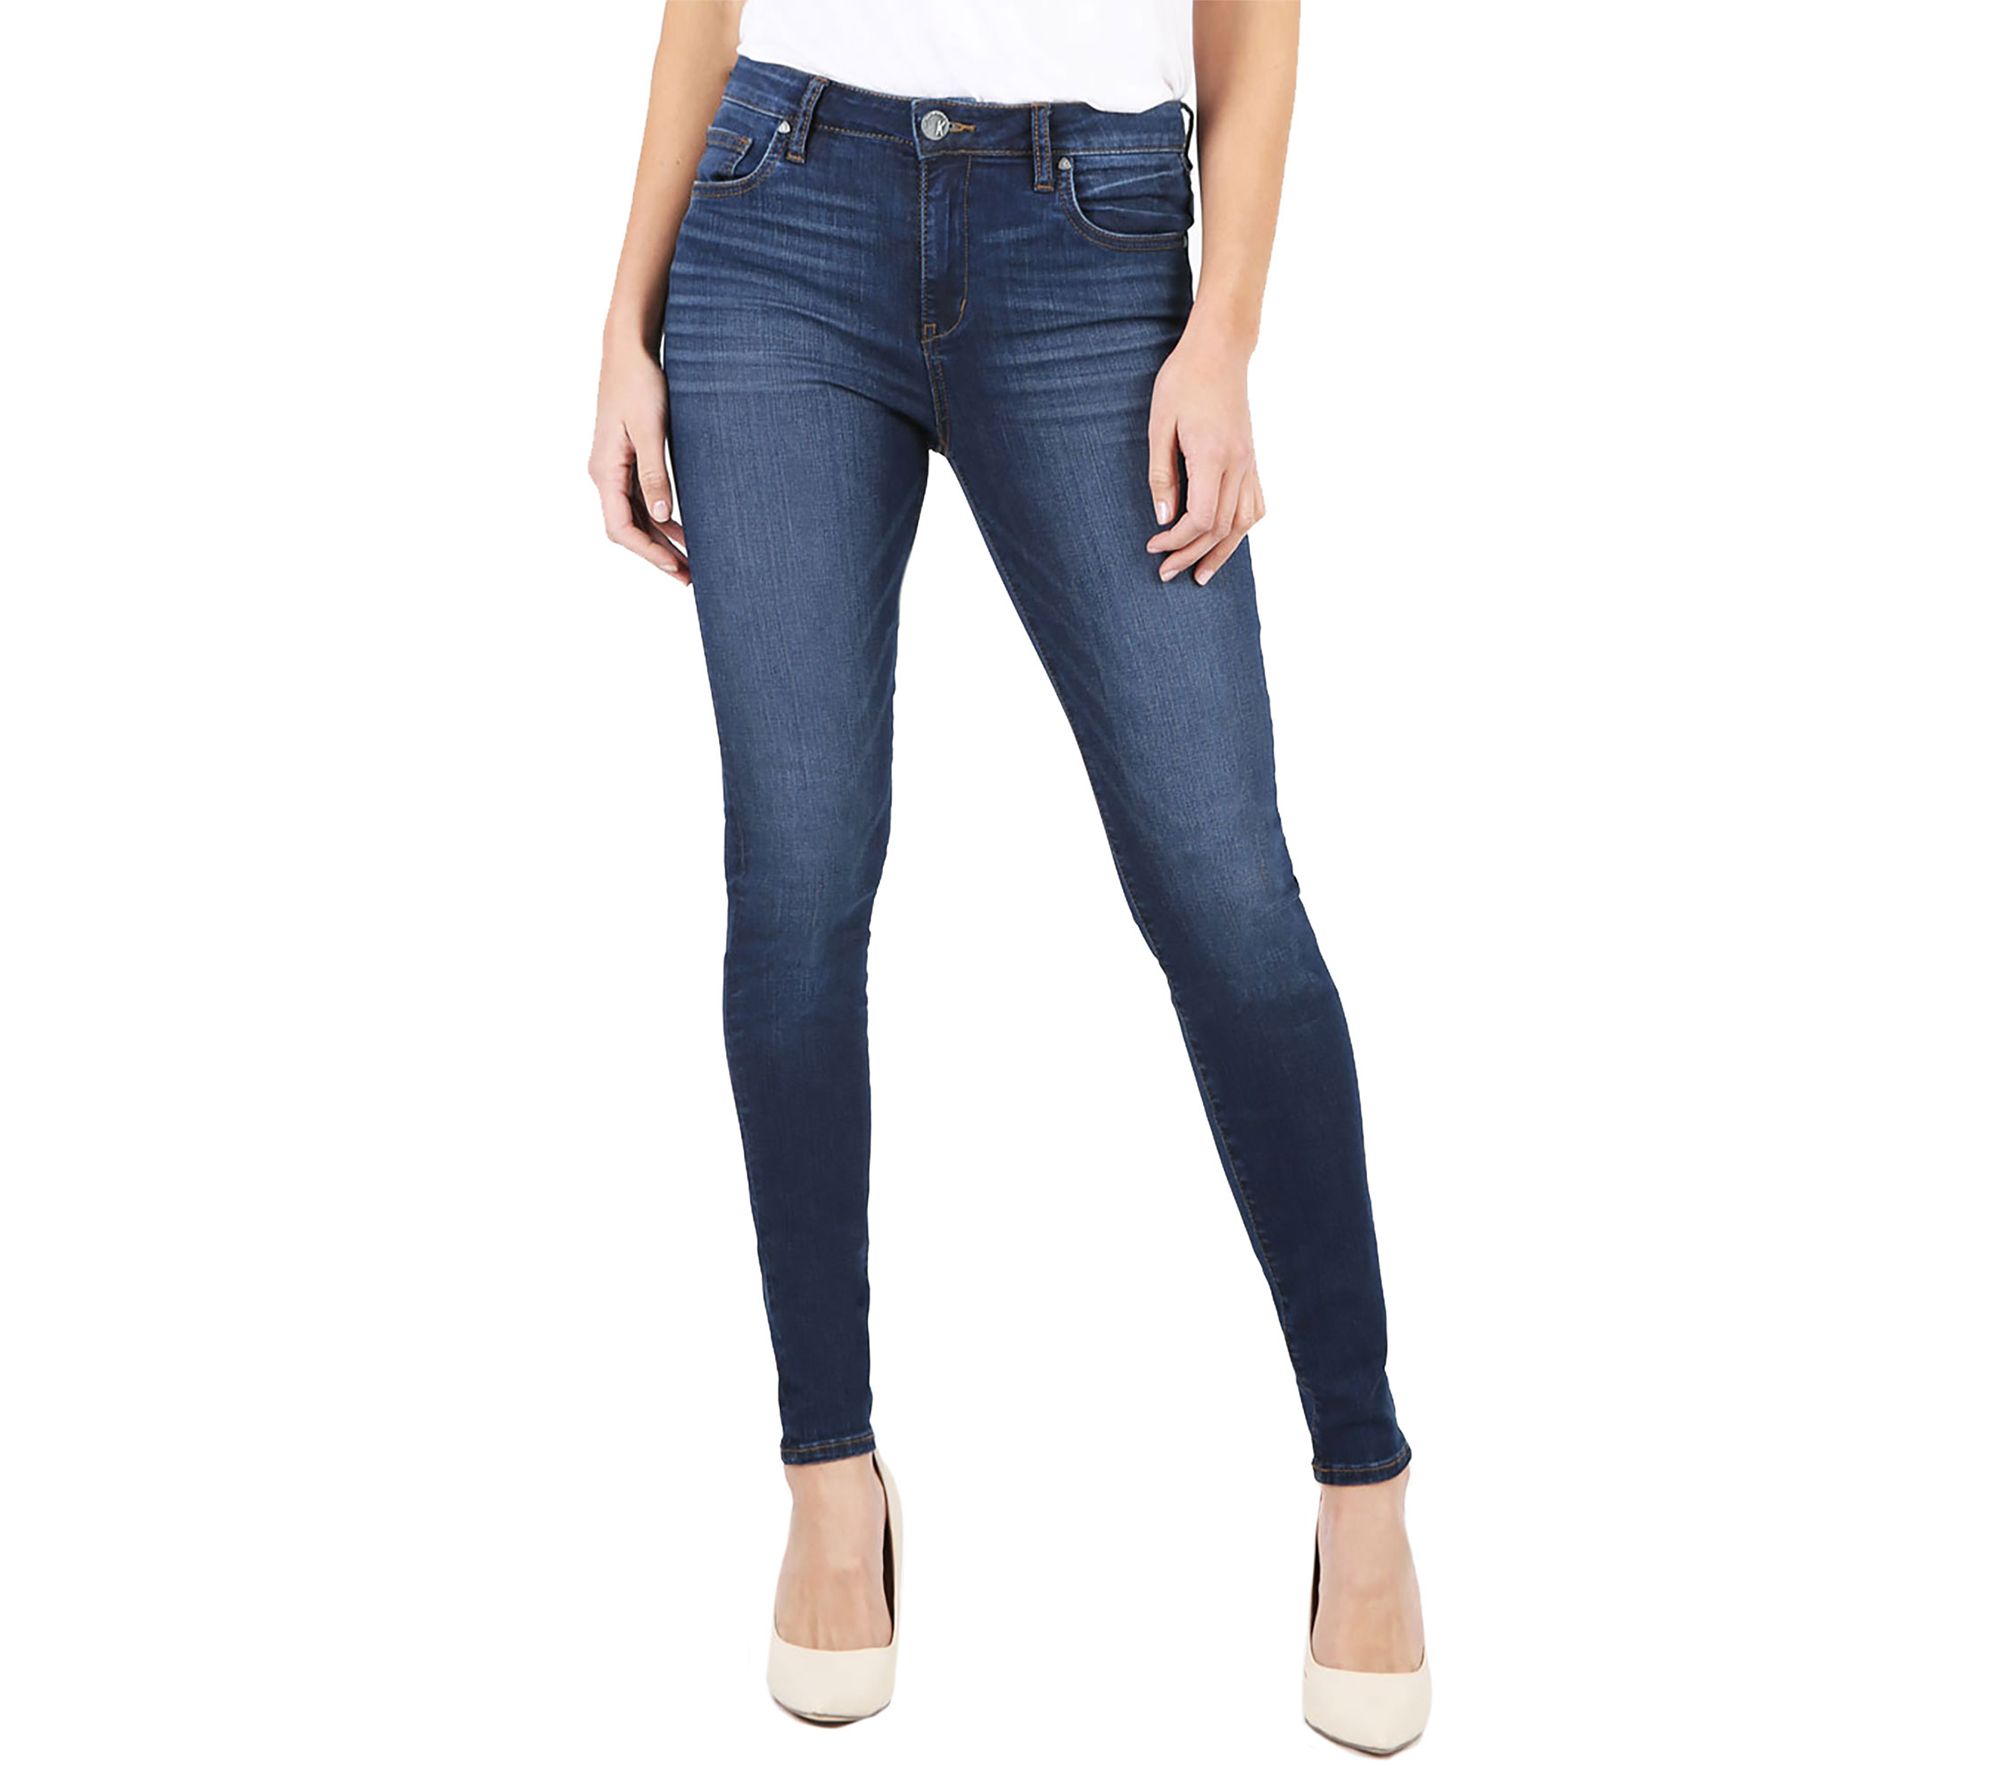 KUT from the Kloth High-Rise Mia Skinny Jeans - Goodly - QVC.com